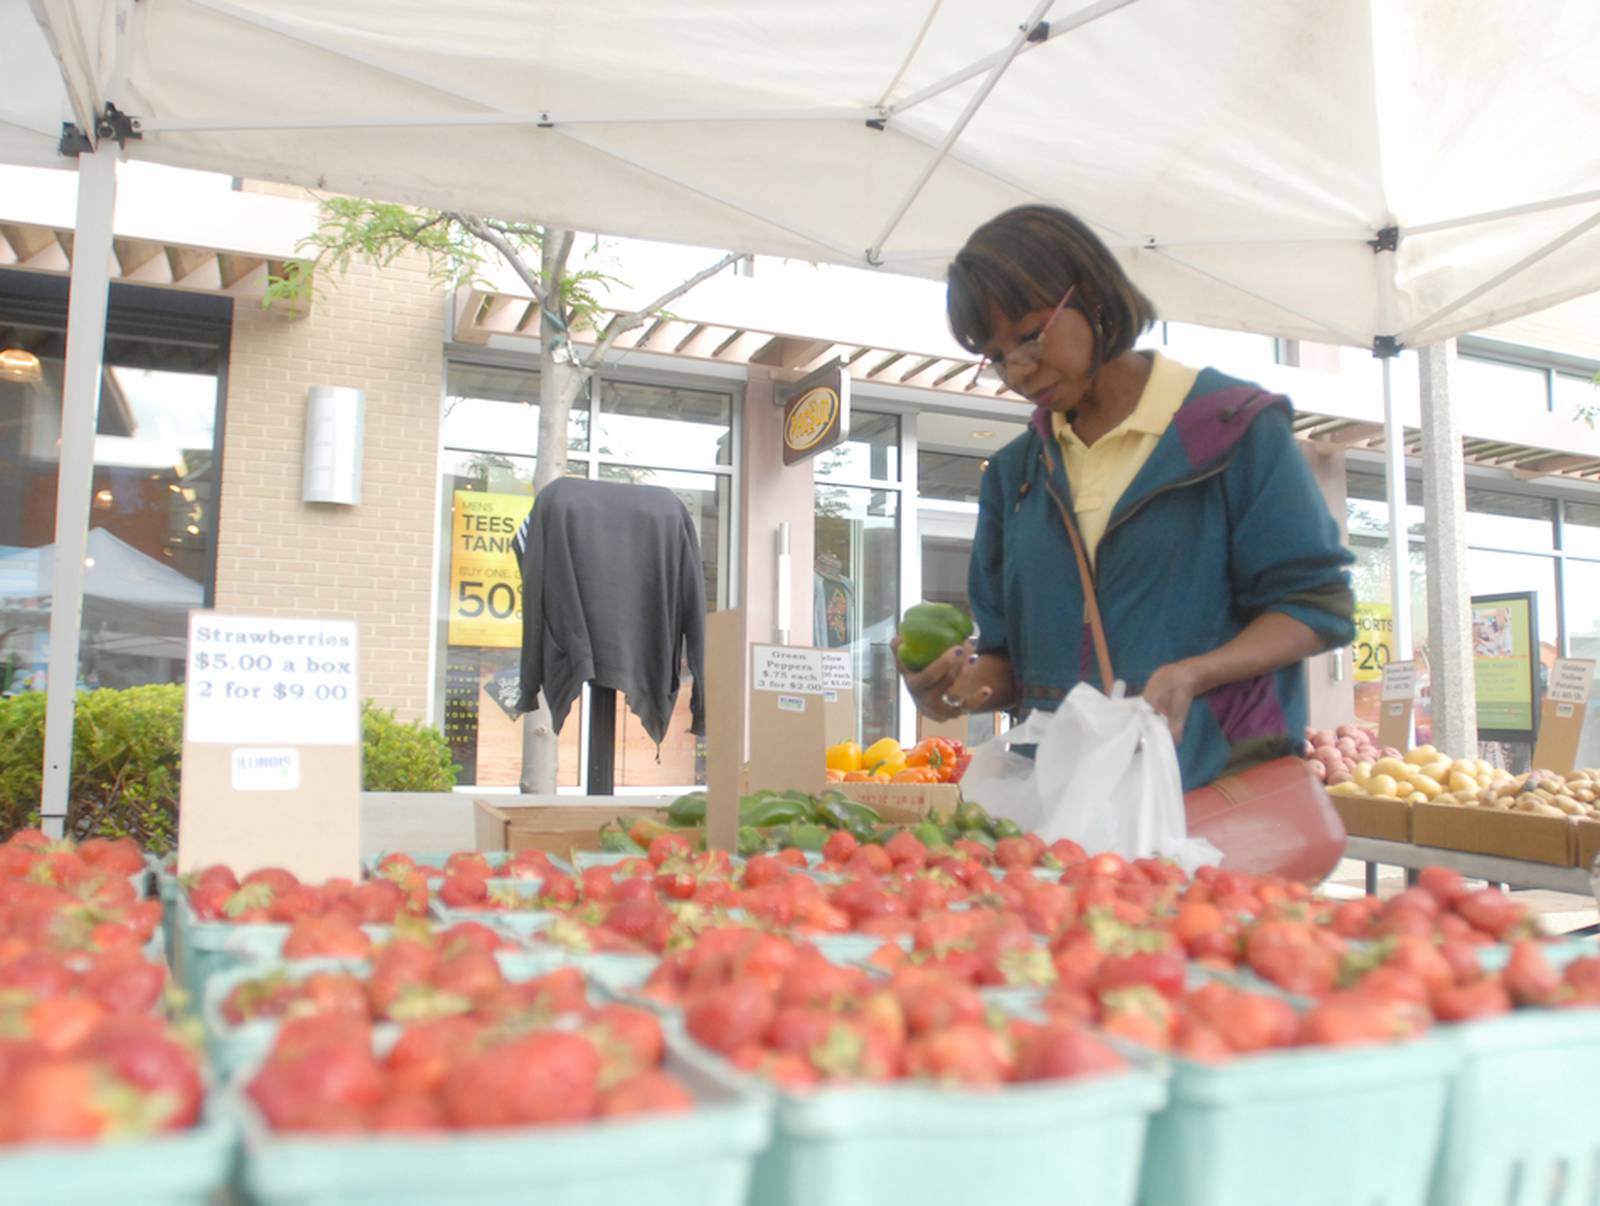 New vendors, products to be featured at Bolingbrook farmers market